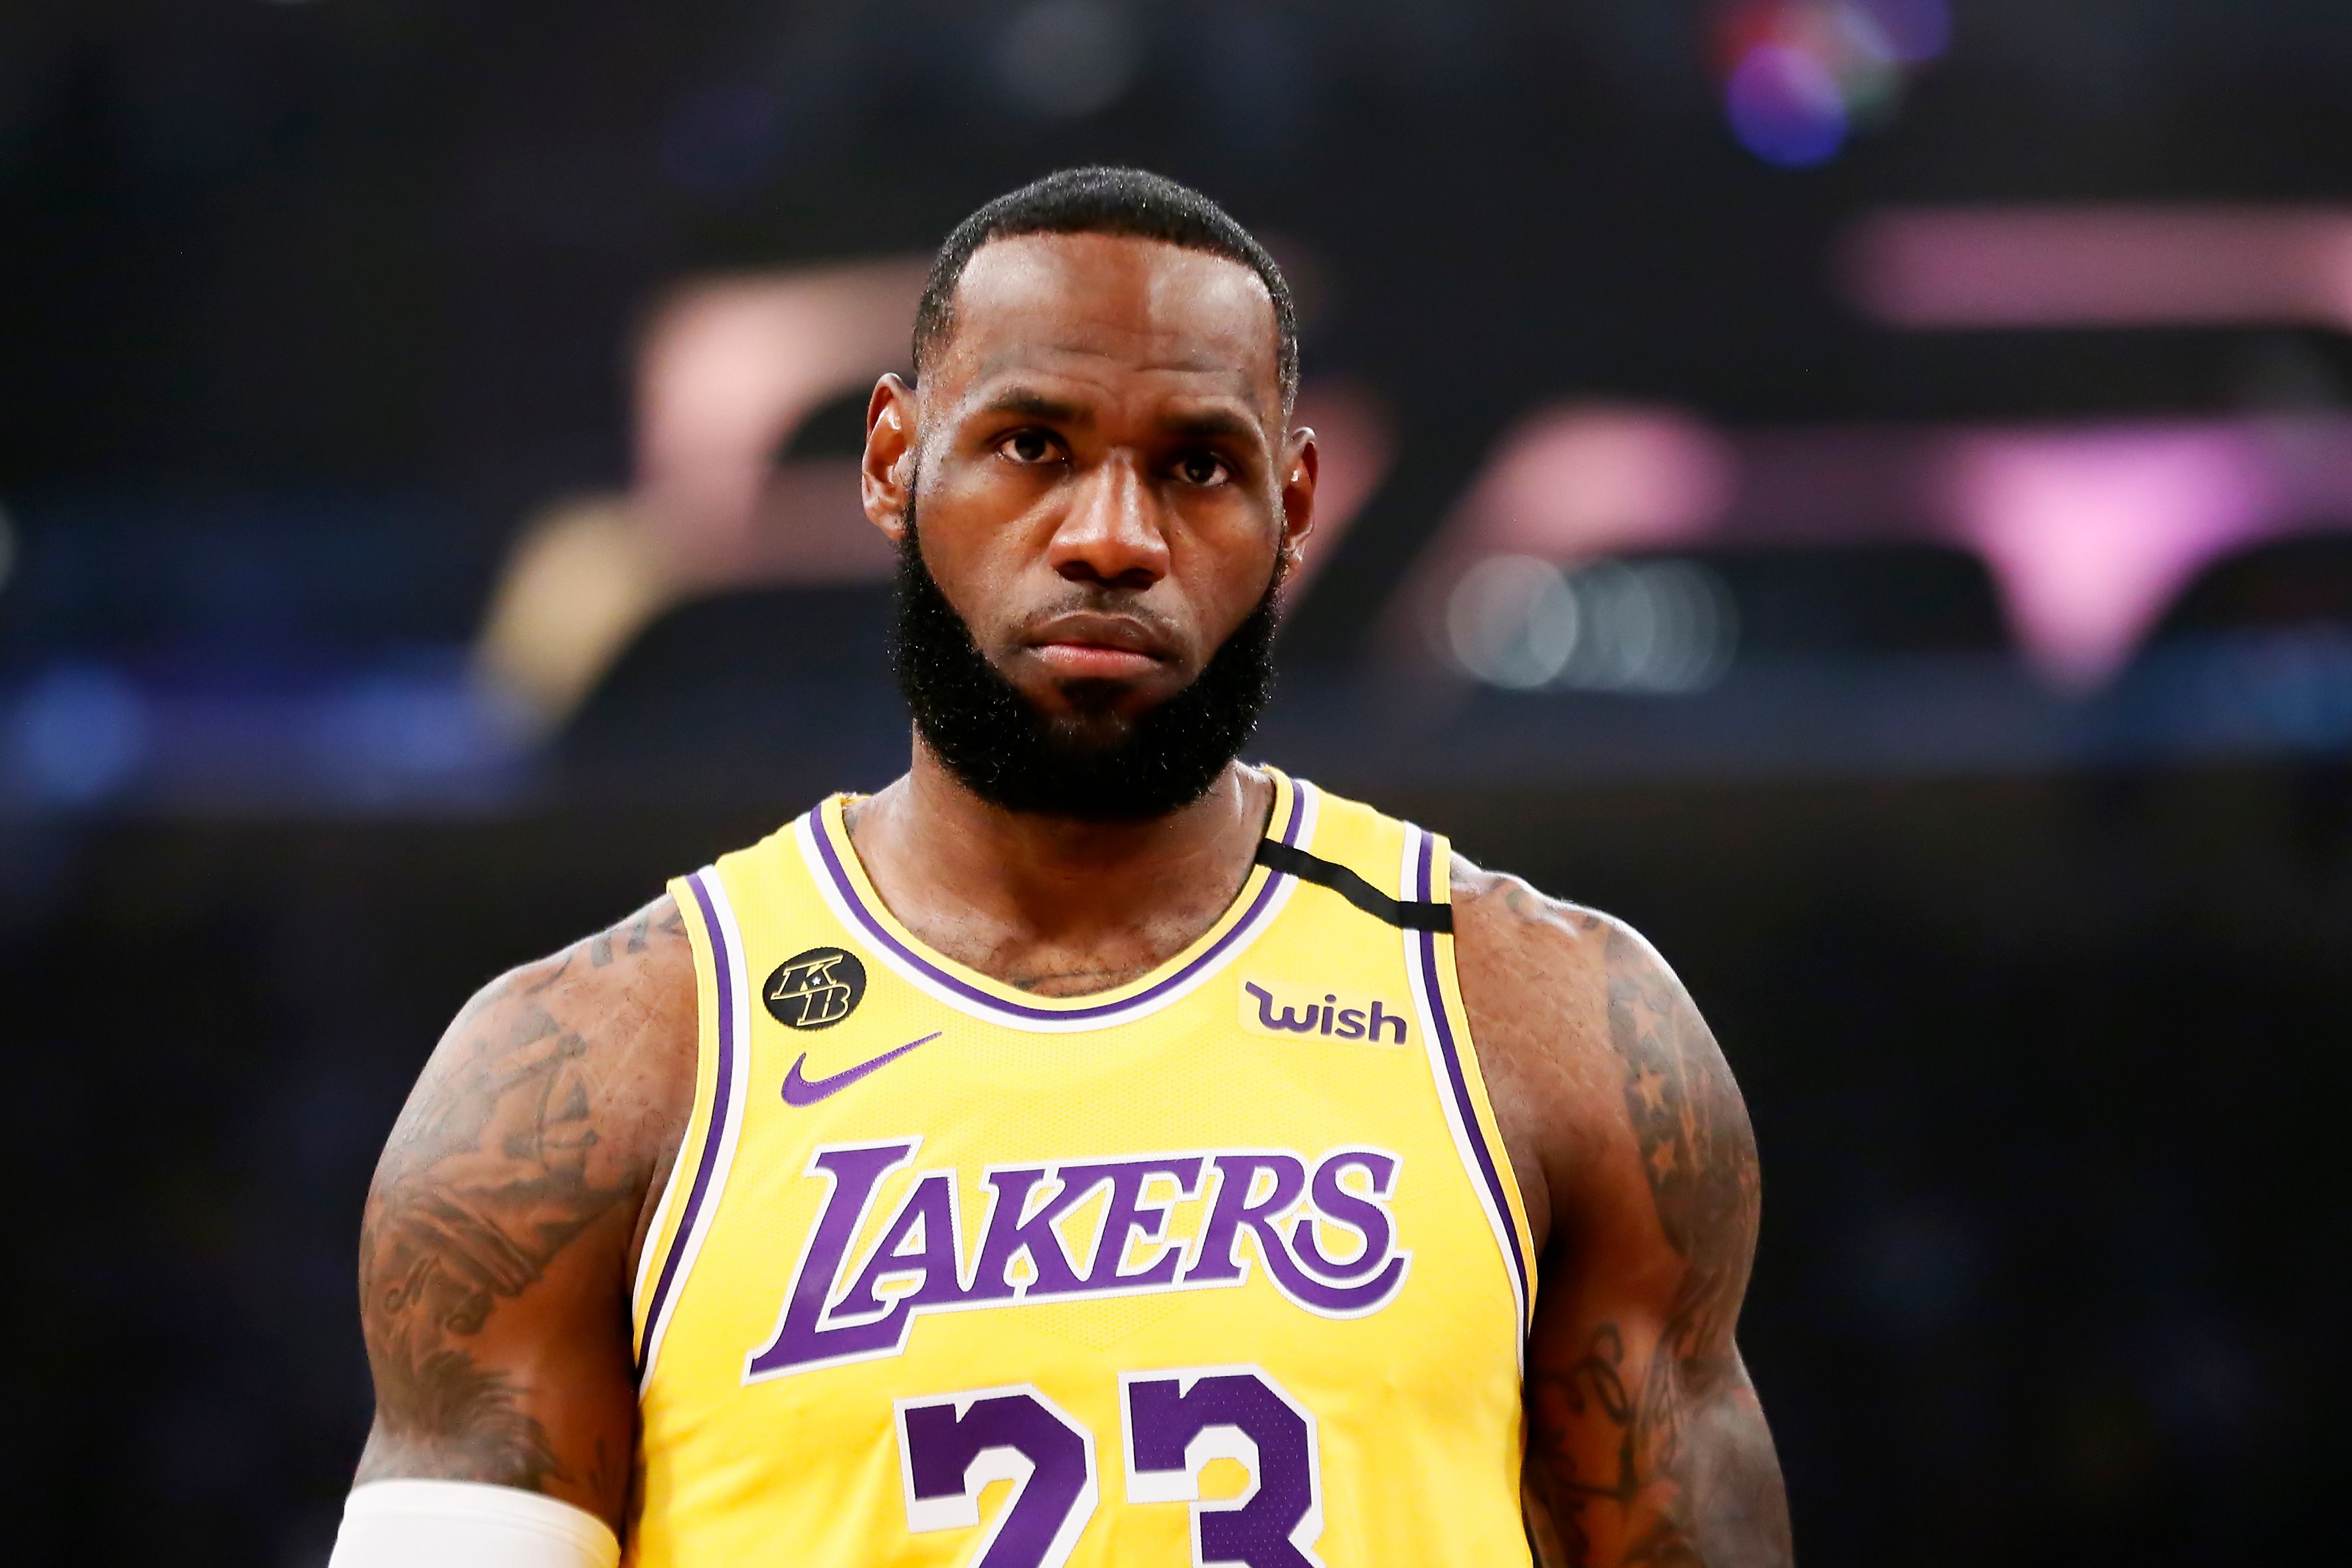 LeBron James #23 of the Los Angeles Lakers looks on during a game against the Brooklyn Nets at the Staples Center on March 10, 2020 in Los Angeles, CA. | Source: Getty Images